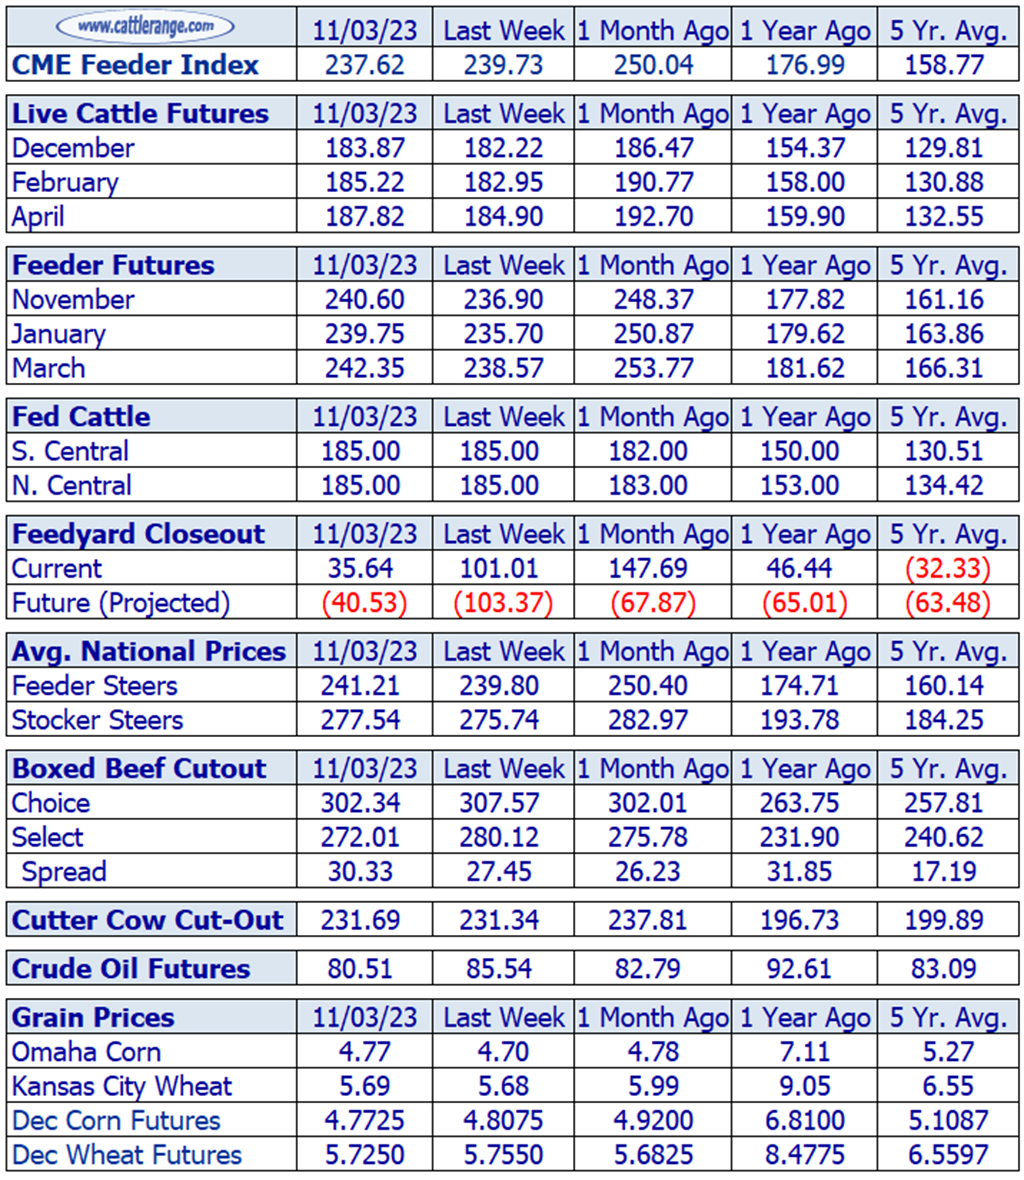 Weekly Cattle Market Overview for Week Ending 11/3/27